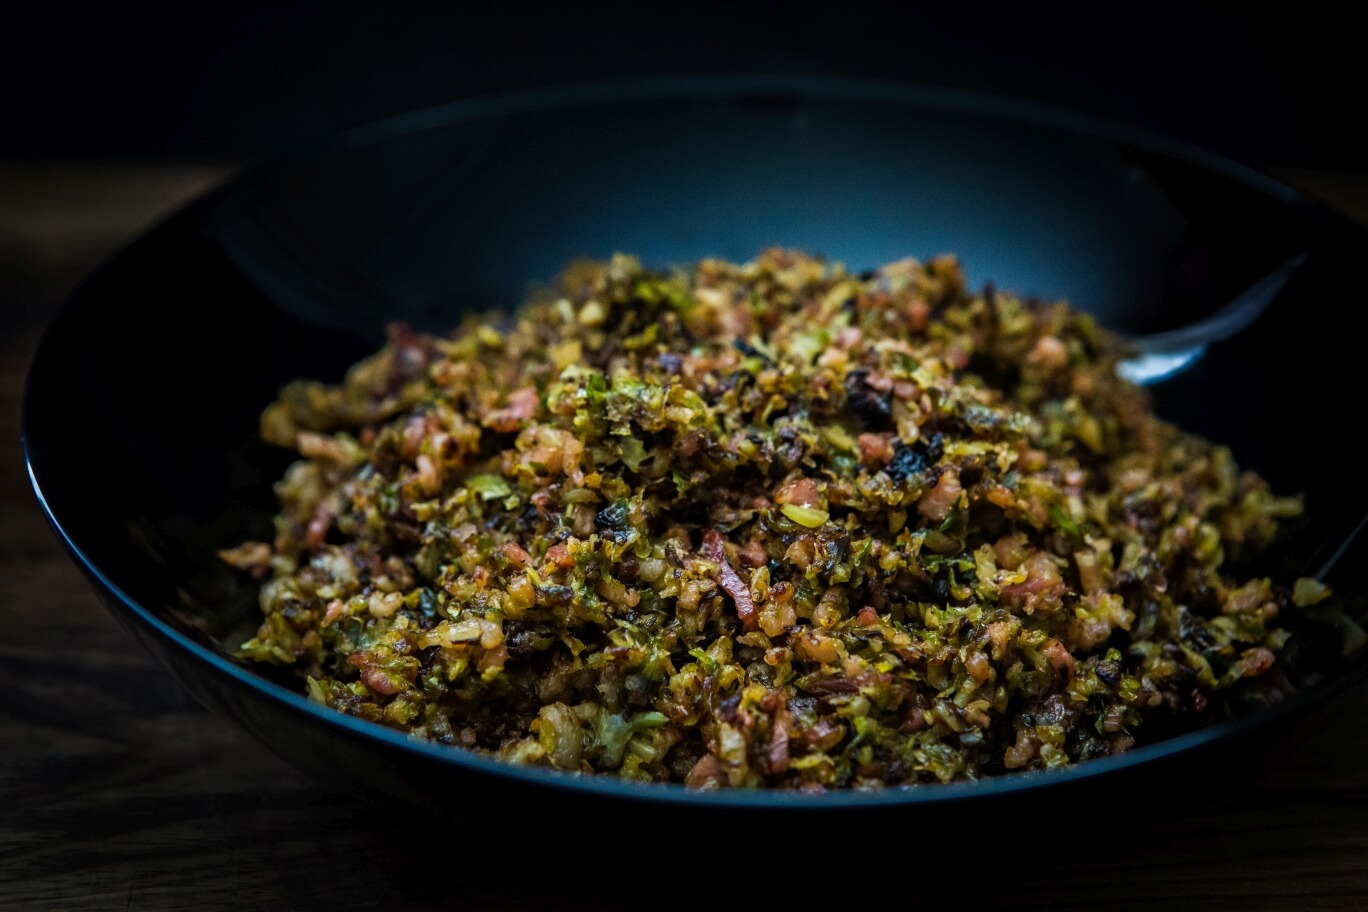 skinnymixer's Bacon & Brussels sprouts